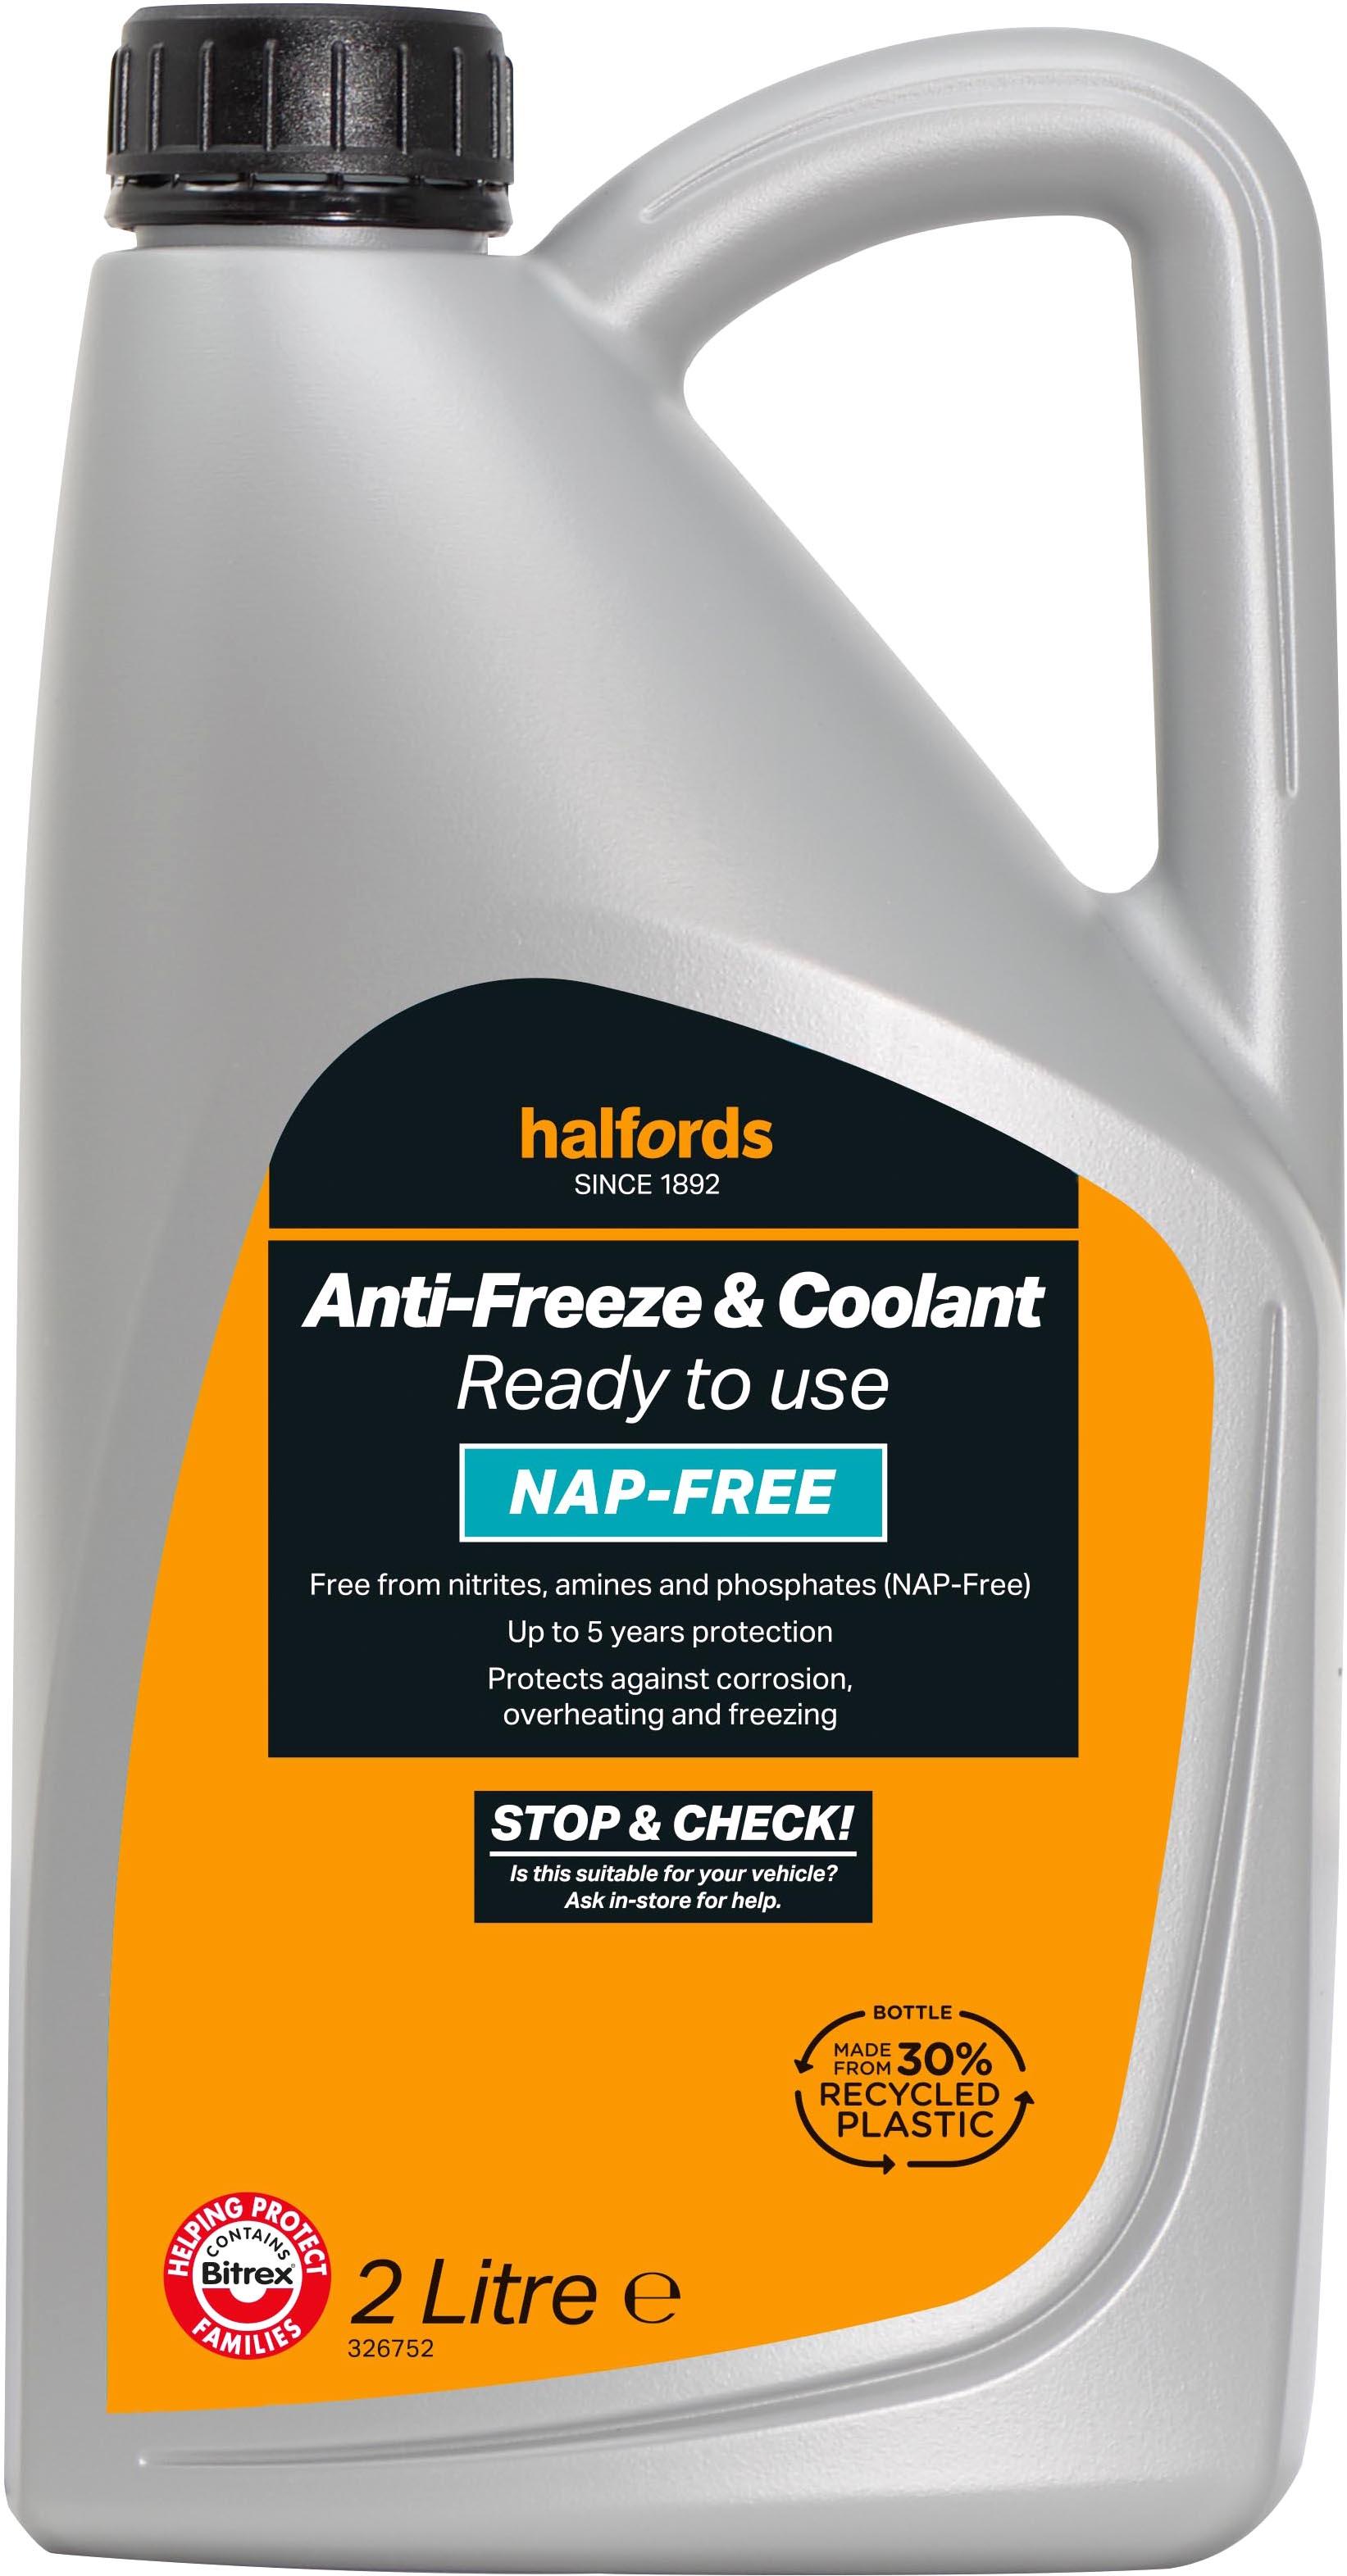 Halfords Nap-Free Hybrid Anti-Freeze And Coolant Ready Mixed - 2L